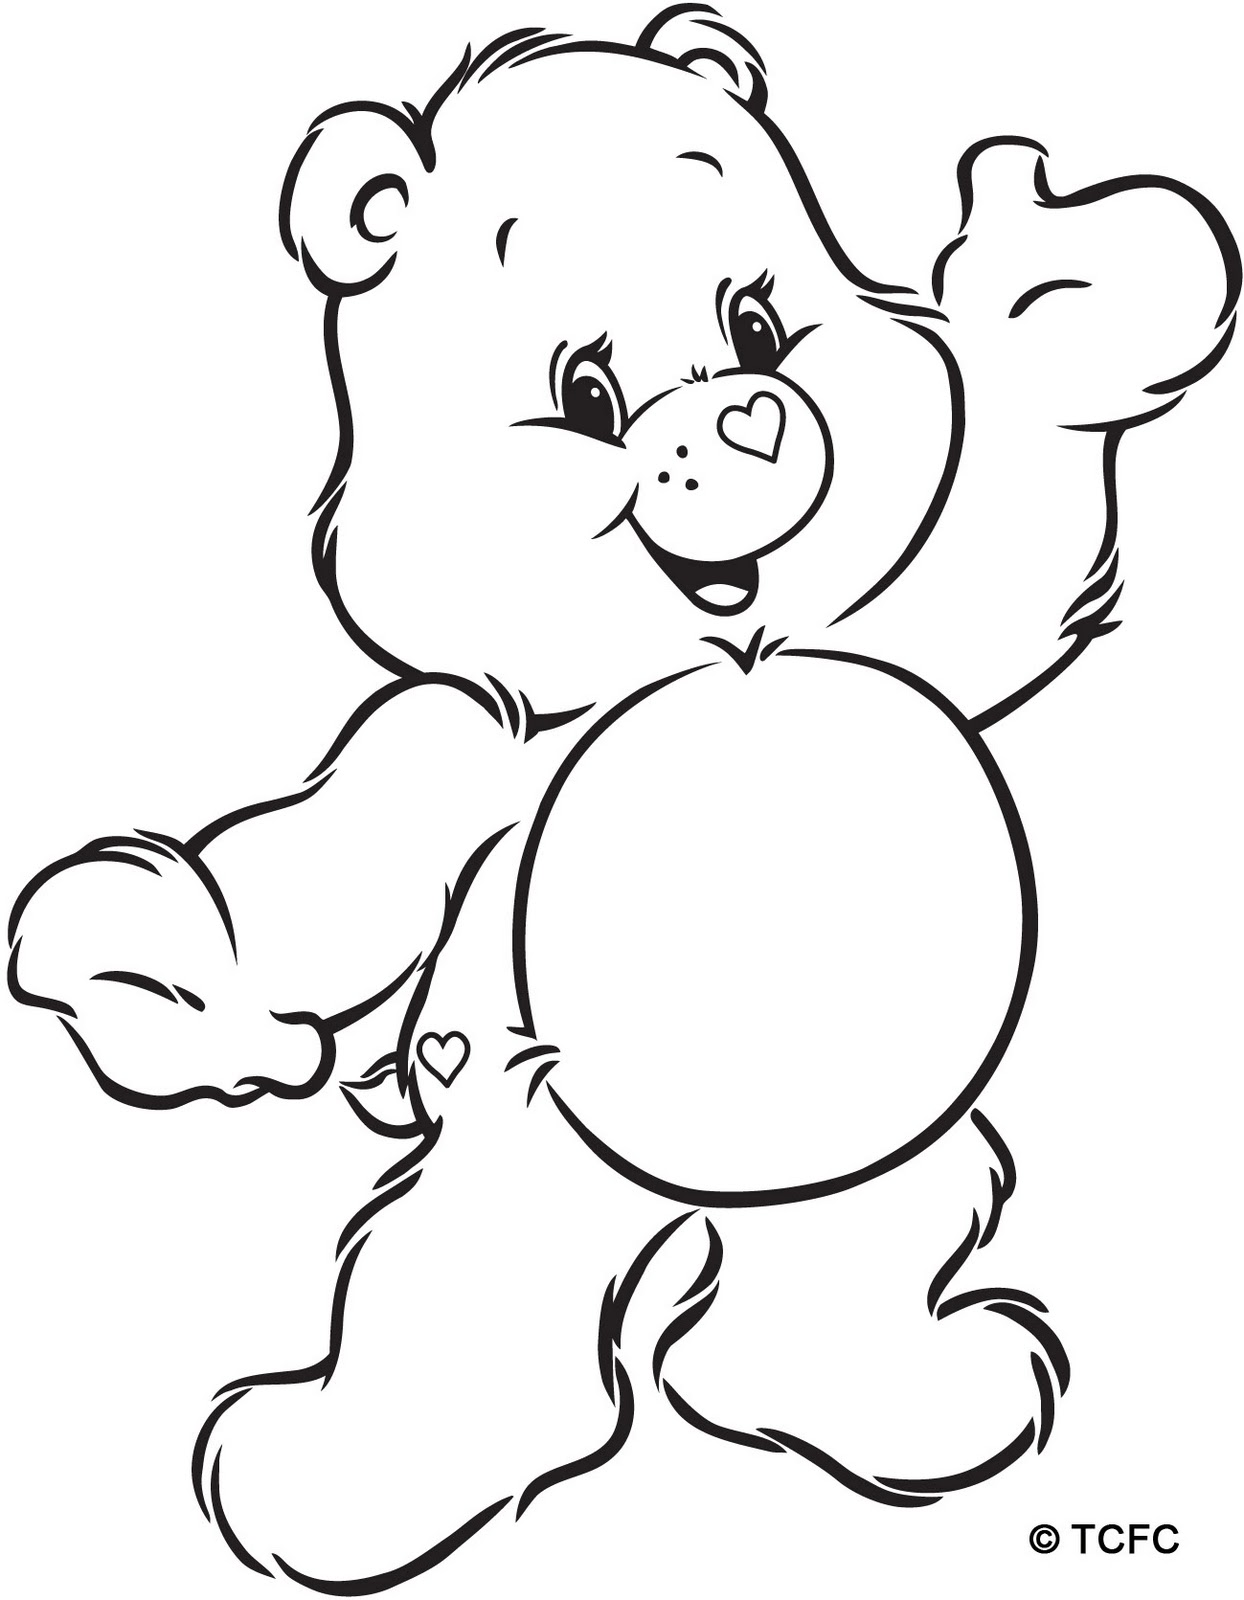 1000+ images about How to drawing Care Bears | Models ...